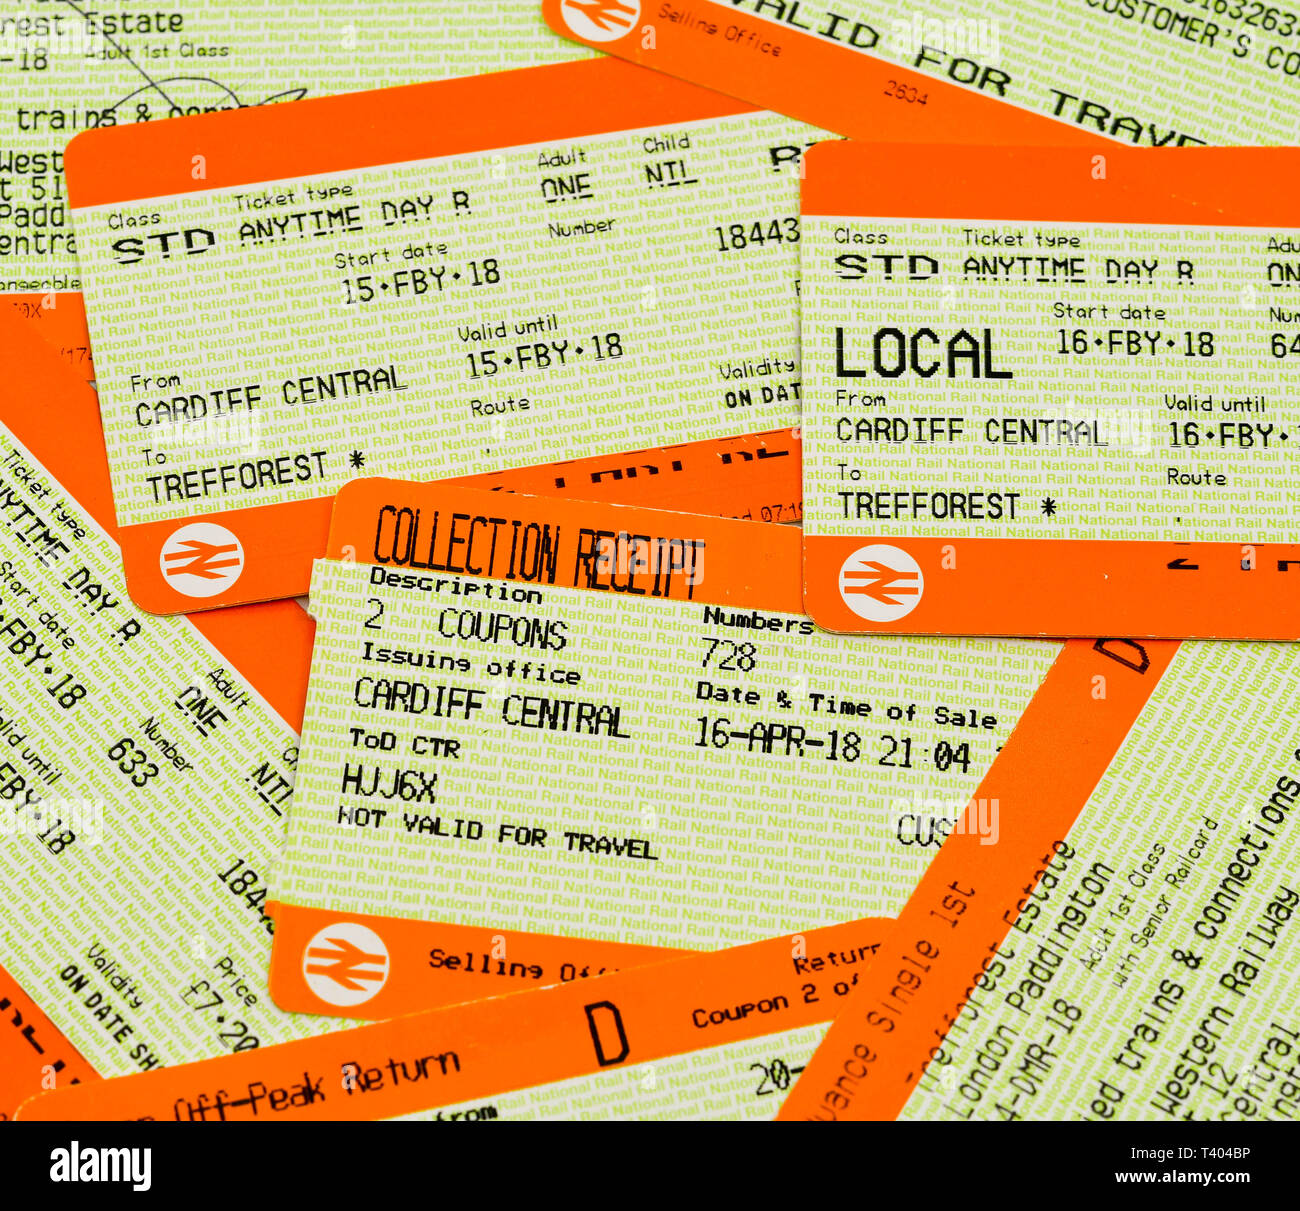 CARDIFF, WALES - APRIL 2019: Close up view of traditional printed rail tickets with the National Rail logo. Stock Photo